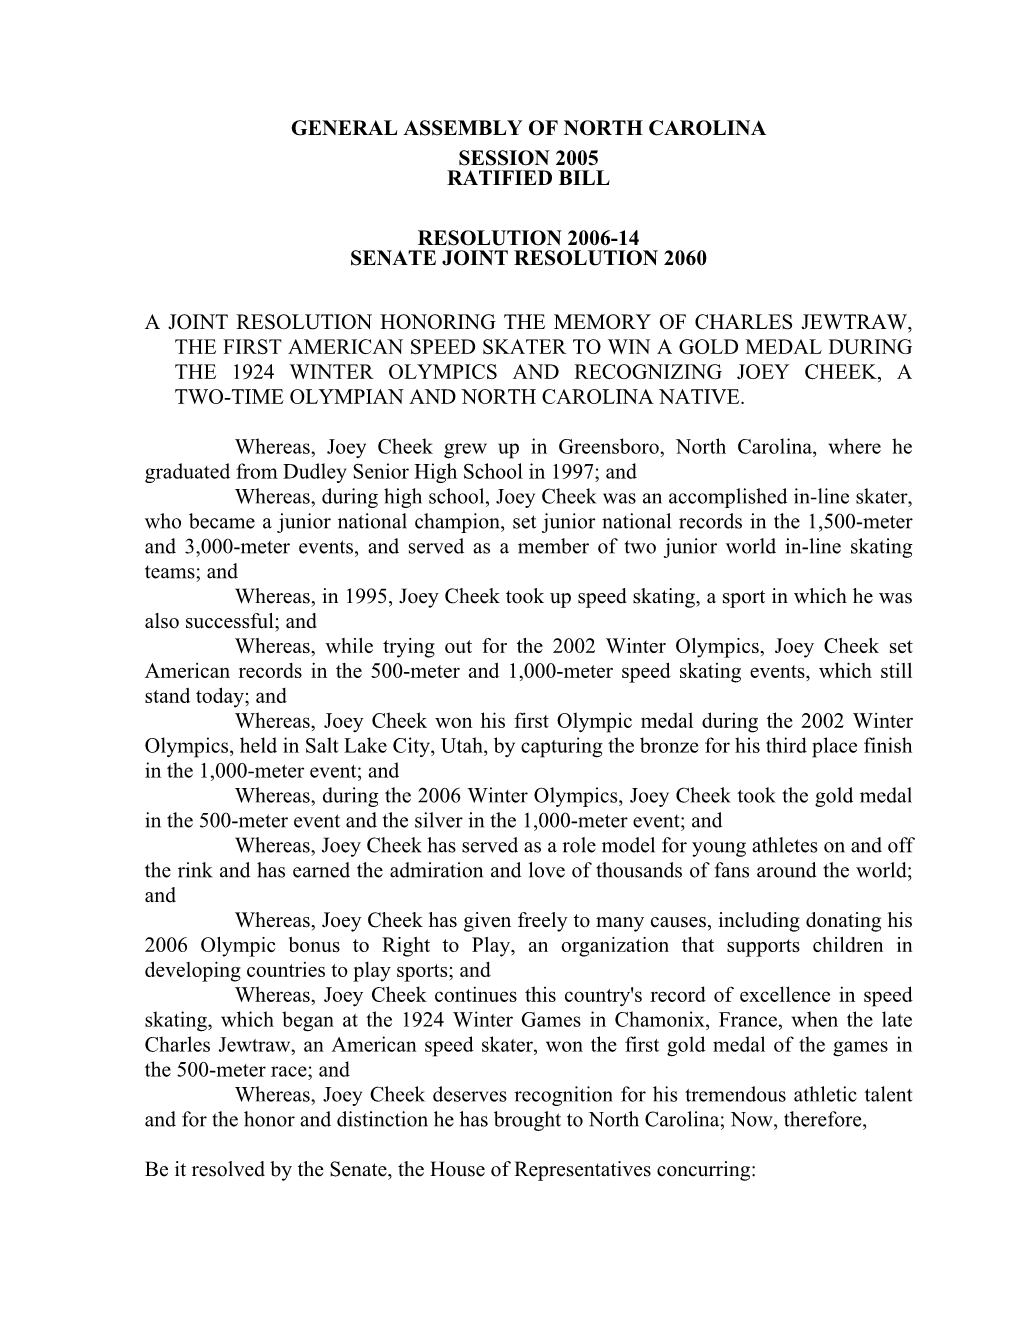 General Assembly of North Carolina Session 2005 Ratified Bill